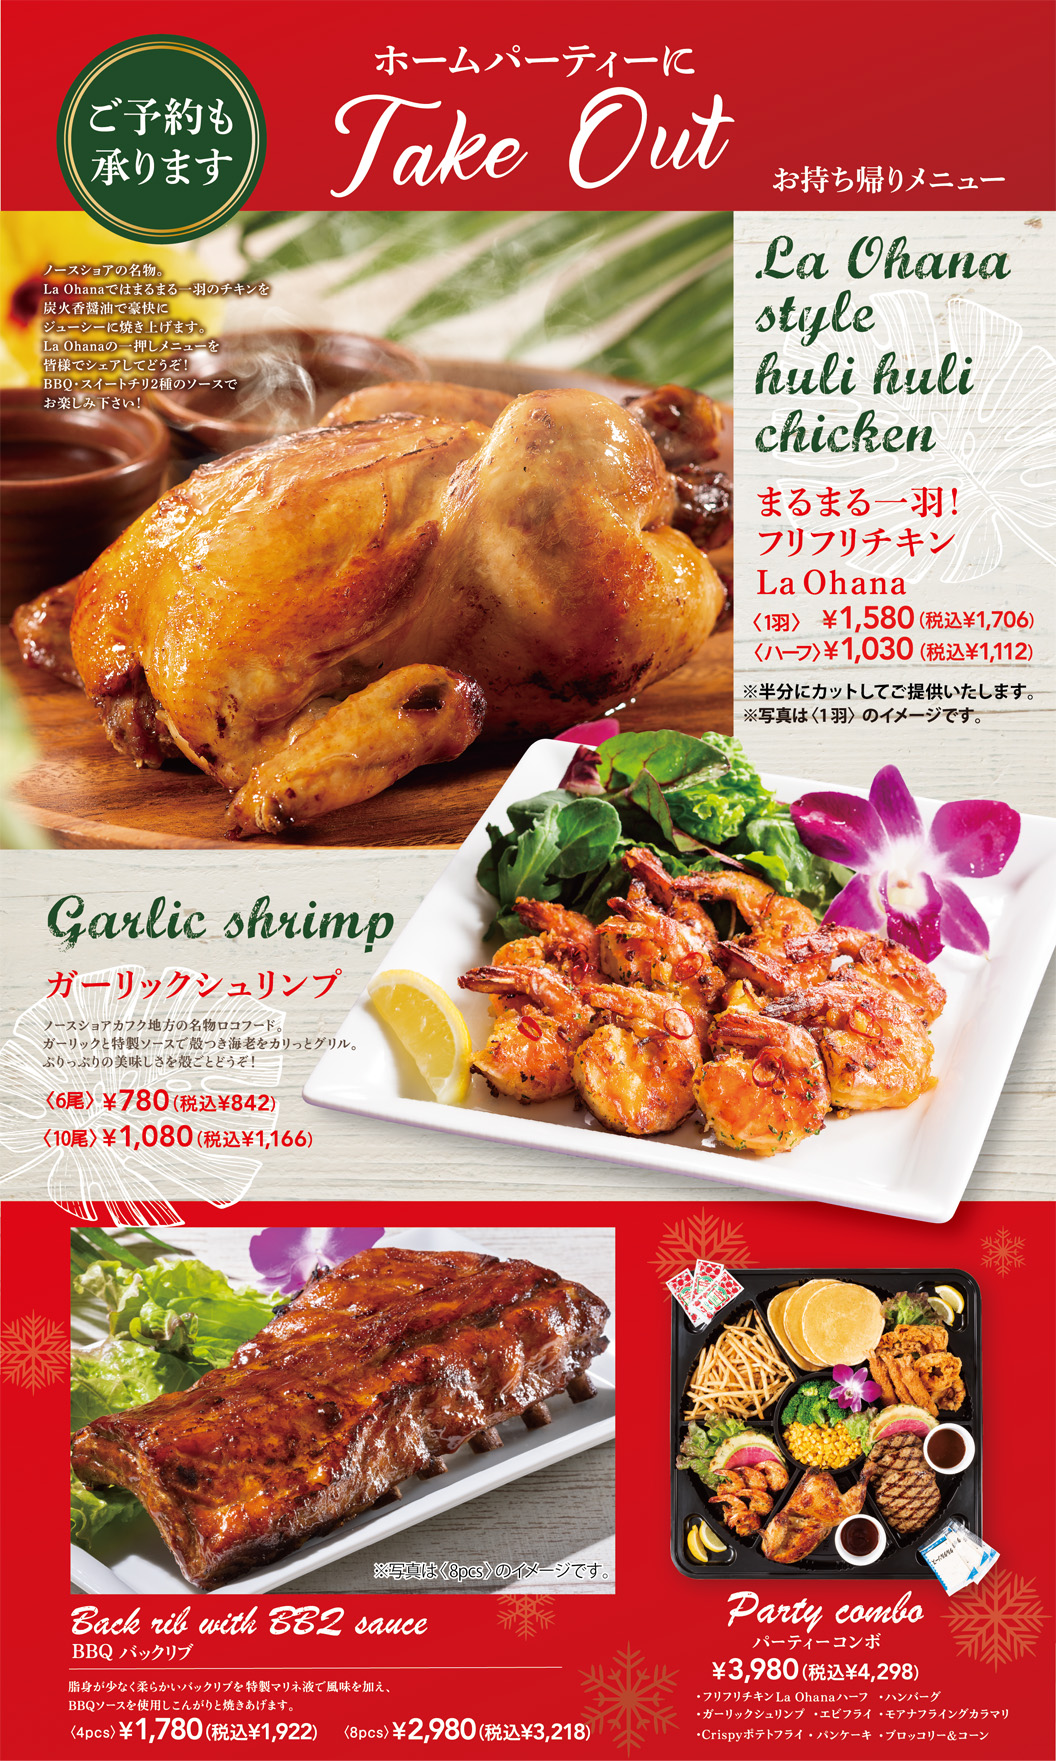 Take out the whole Takeout Menu for your home party! Furifuri Chicken, Garlic Shrimp, BBQ Back Ribs, Party Combo